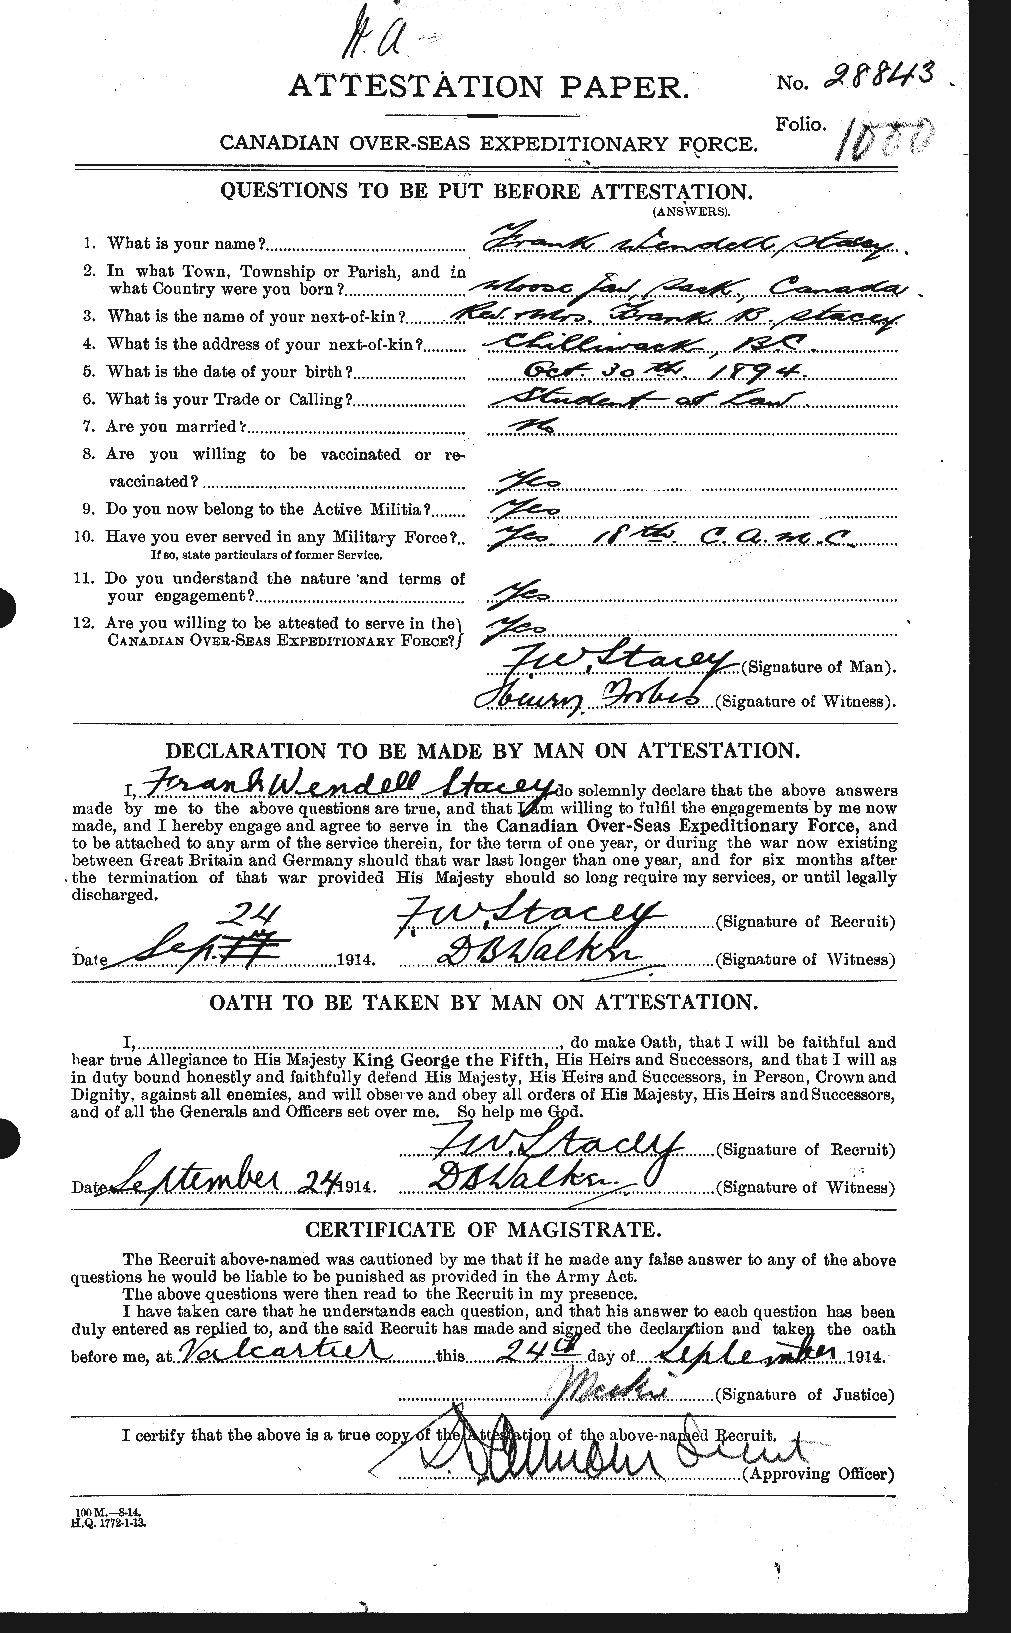 Personnel Records of the First World War - CEF 113770a